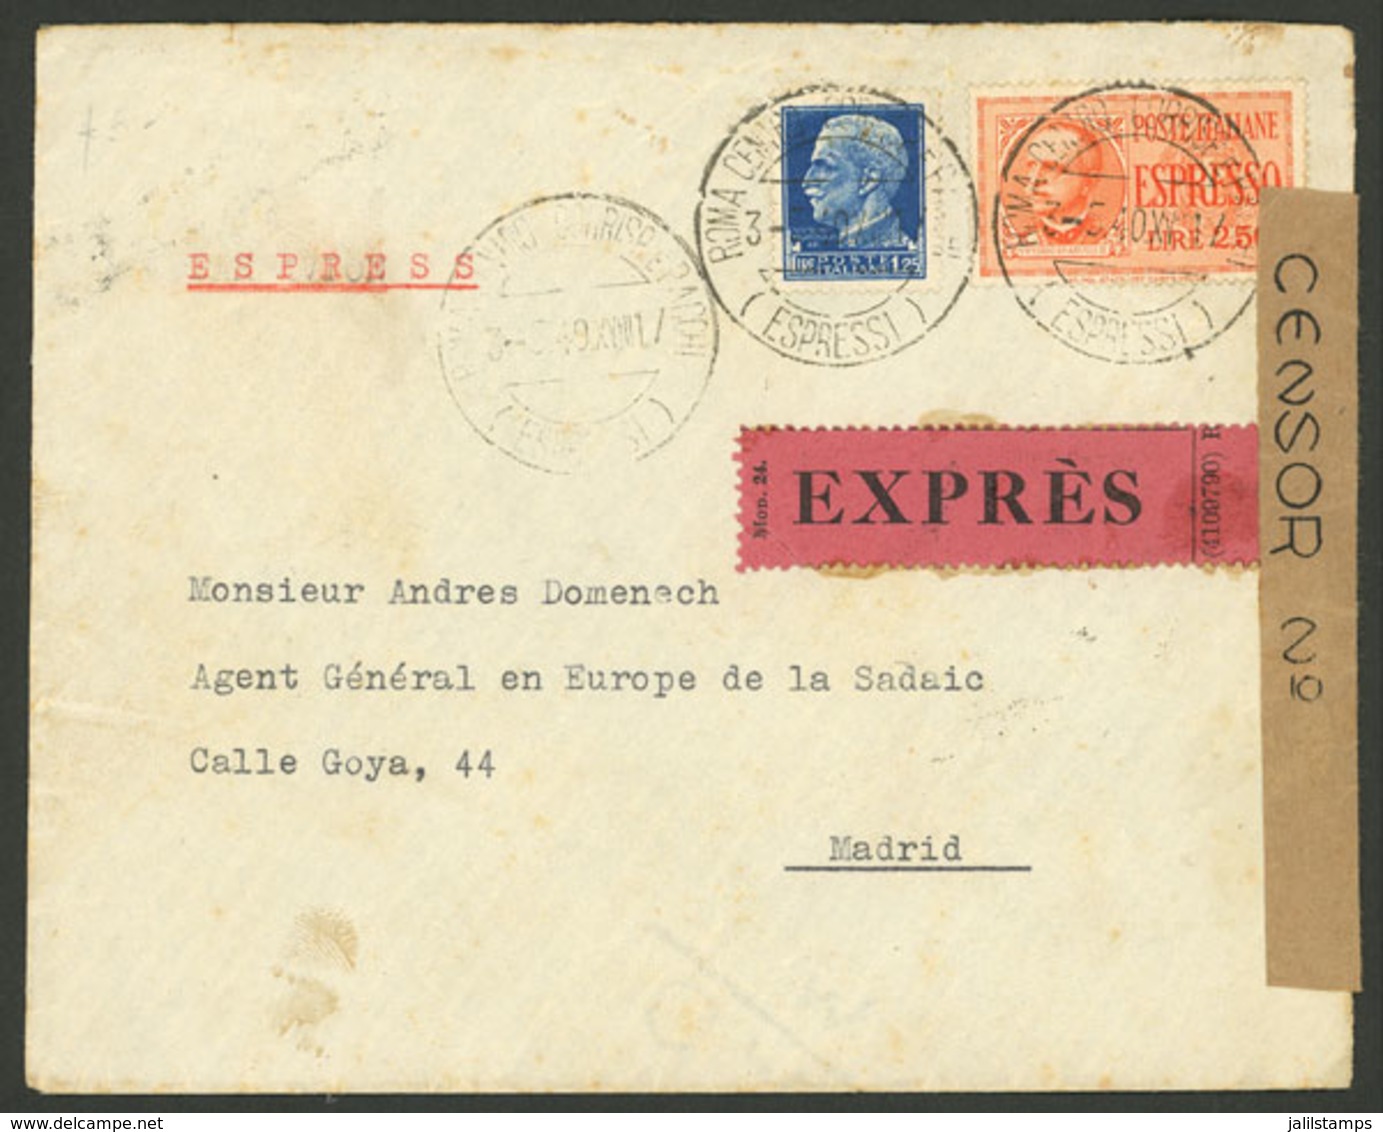 ITALY: 3/MAY/1940 Roma - Madrid, Express Cover Franked With 1.25L. For Regular Postage + 2.50L. For The Express Fee, Wit - Non Classés